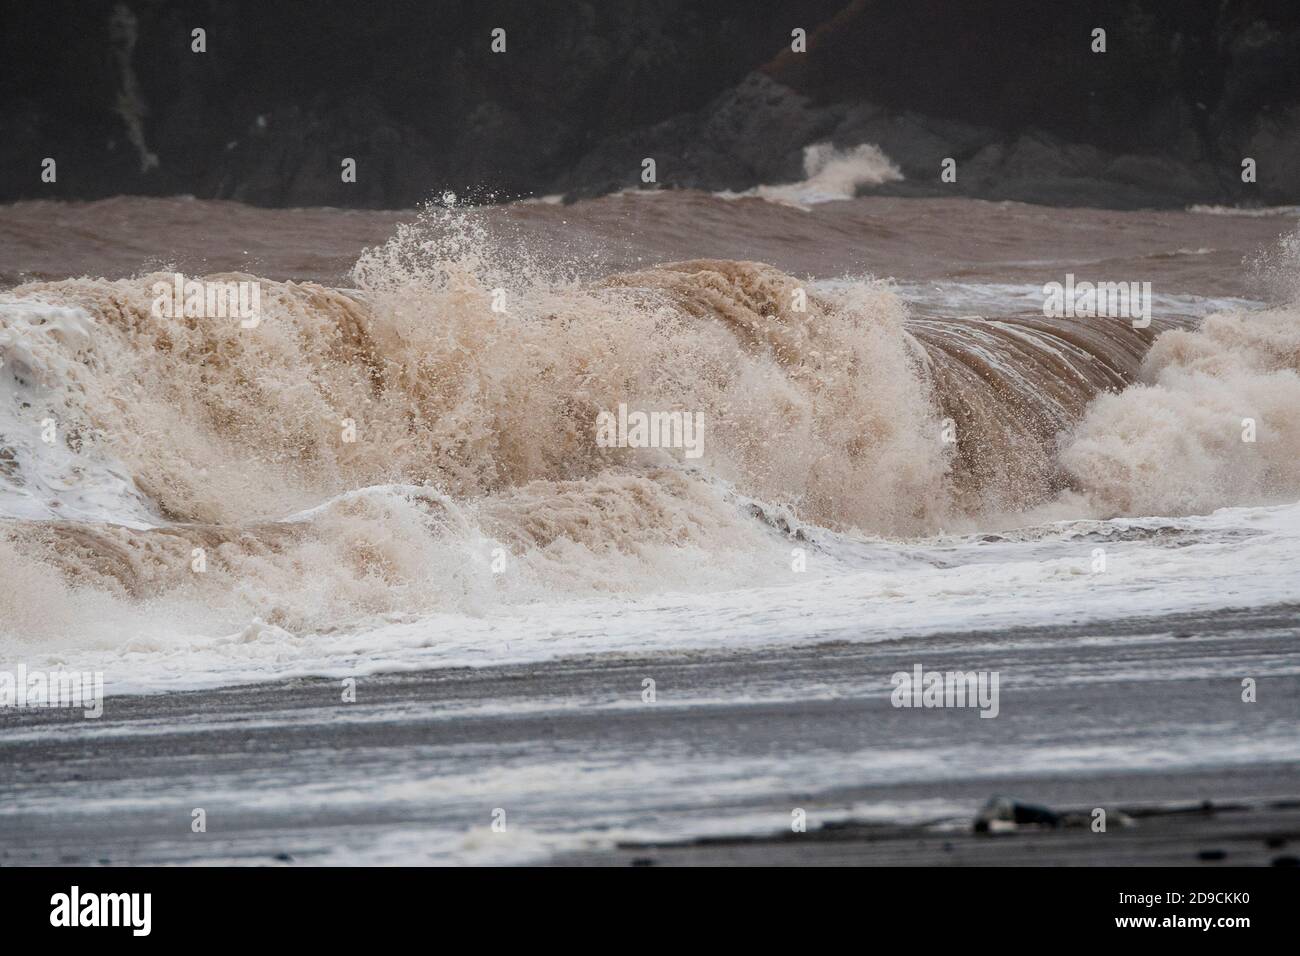 A large wave breaking on a beach durine a gale. Lots of spay and detail visible. Stock Photo